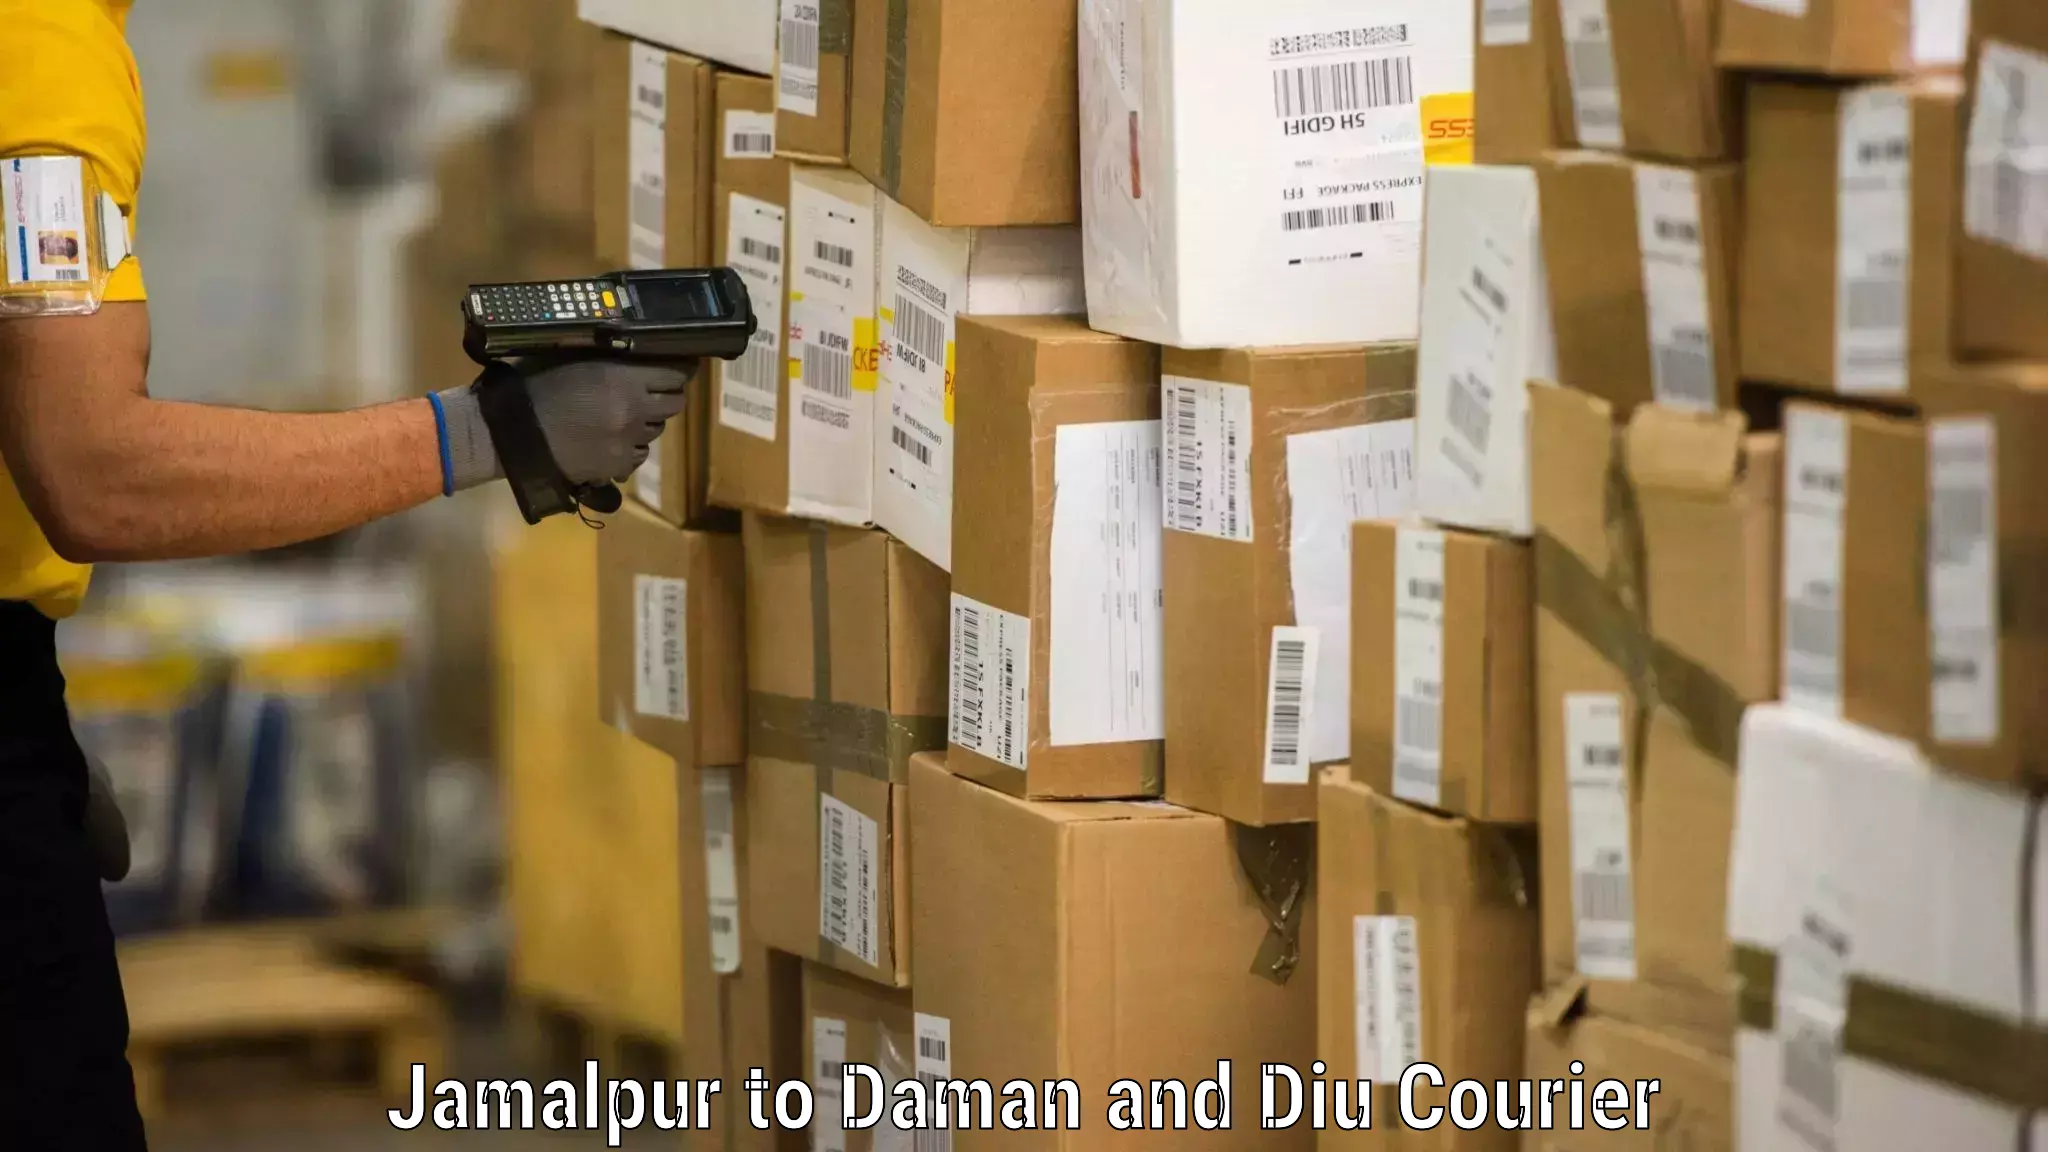 Trusted relocation experts Jamalpur to Daman and Diu